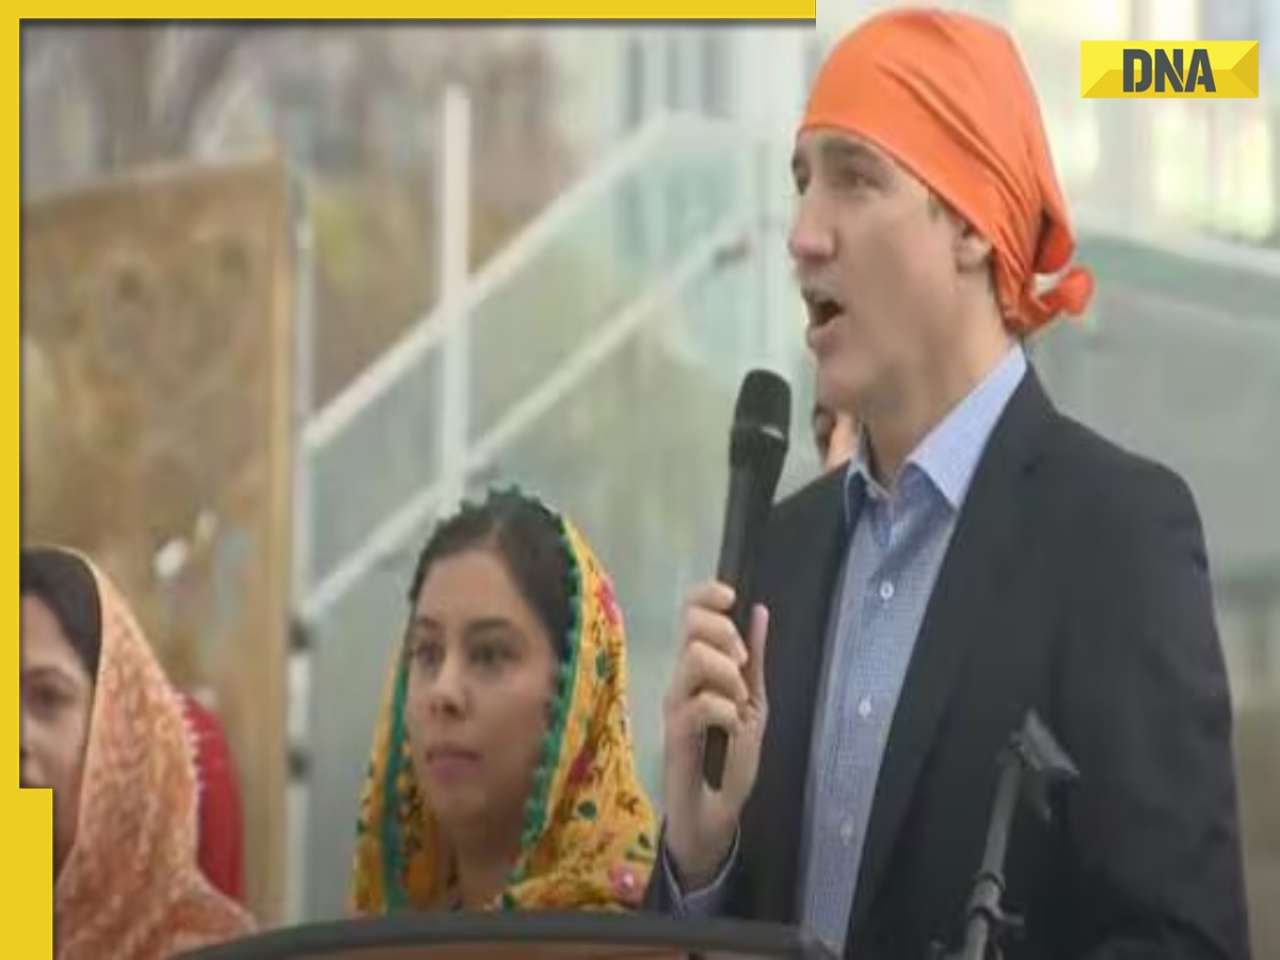 'Disturbing actions allowed': India summons Canada envoy over Khalistan slogans at event attended by Trudeau